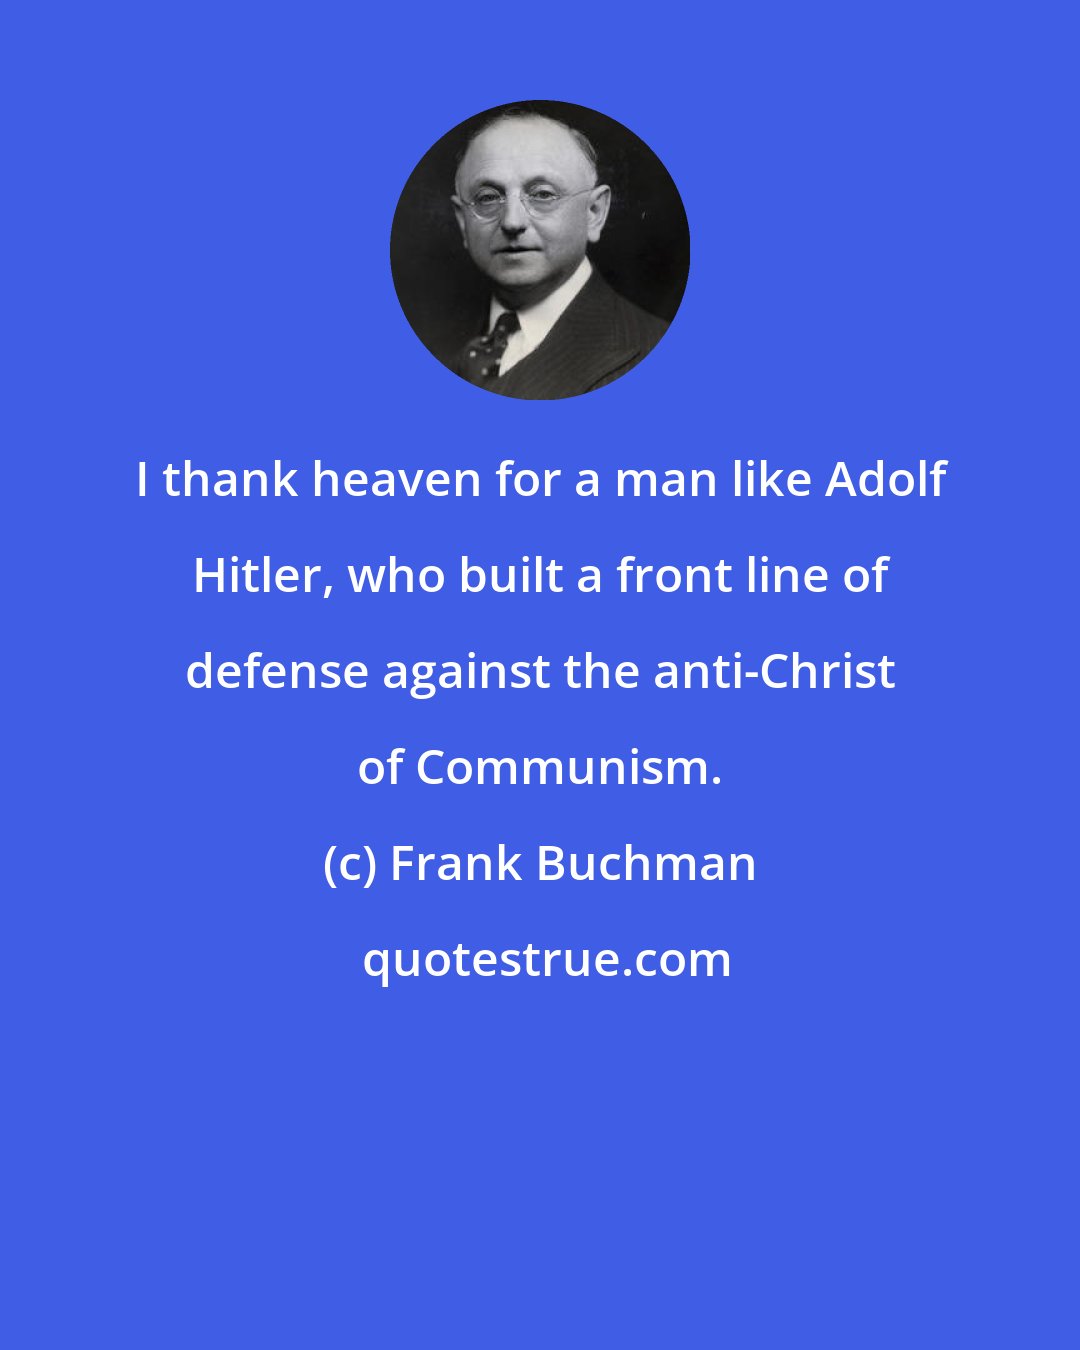 Frank Buchman: I thank heaven for a man like Adolf Hitler, who built a front line of defense against the anti-Christ of Communism.